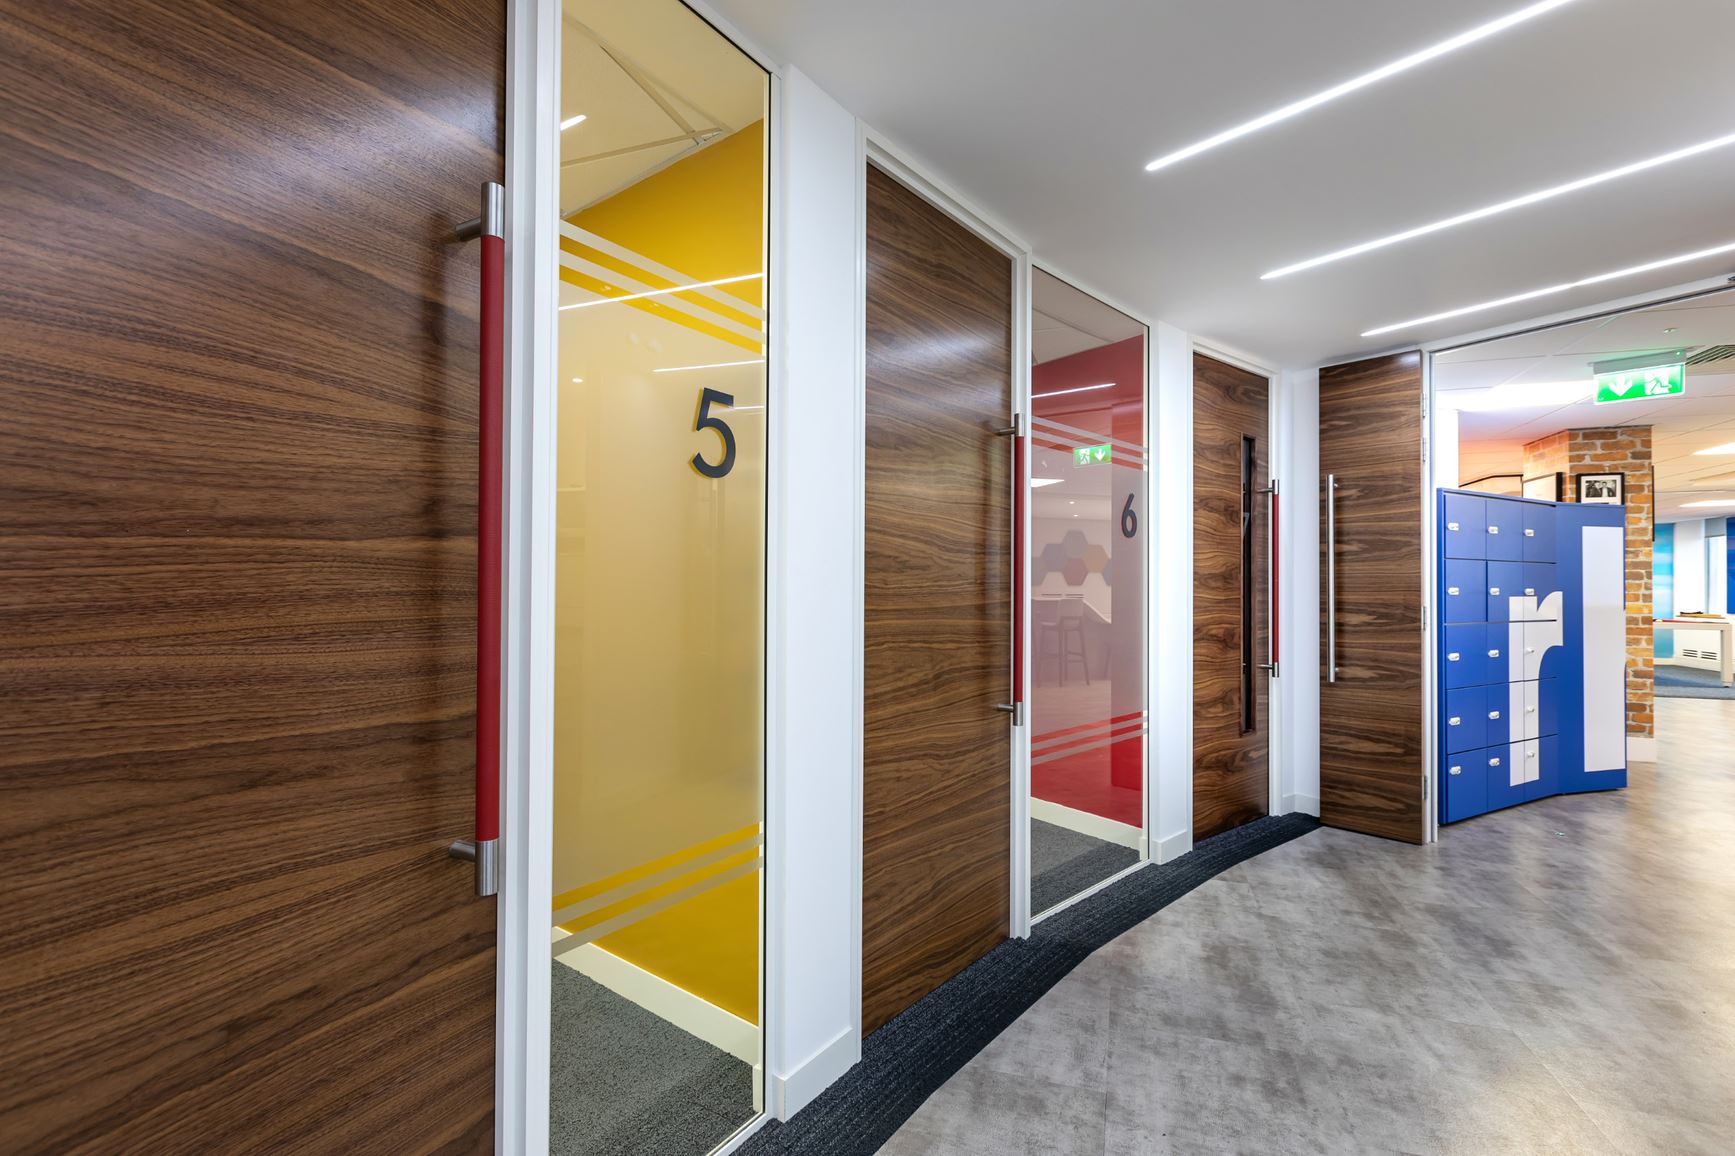 Two meeting rooms with dark wooden doors and glass partitioning.